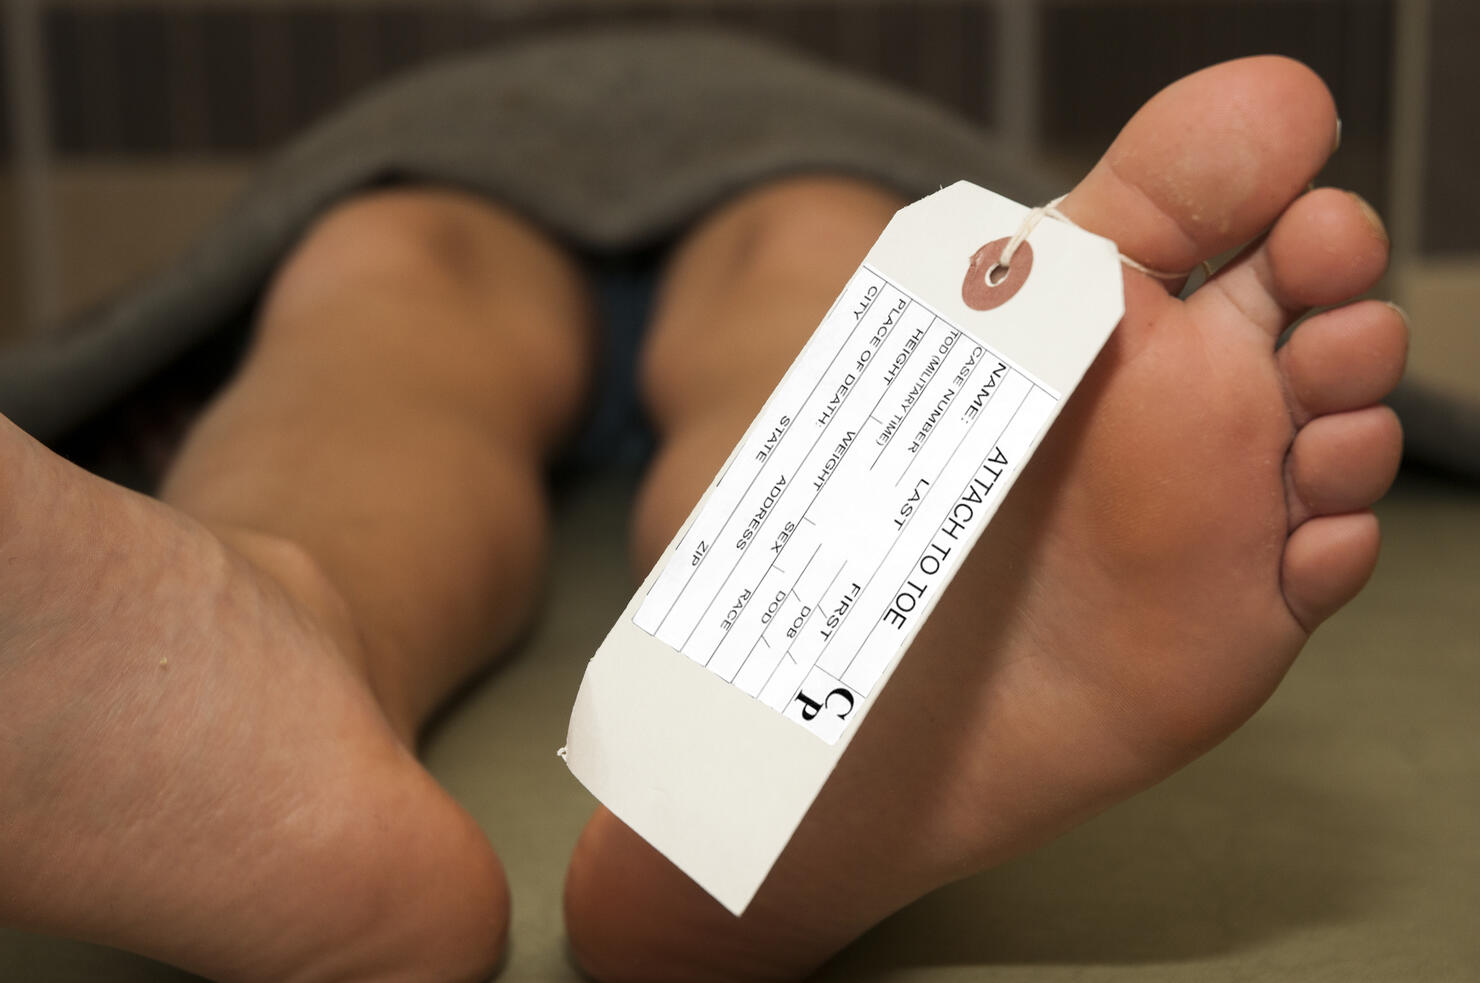 Toe tag tied to a corpse in a mortuary